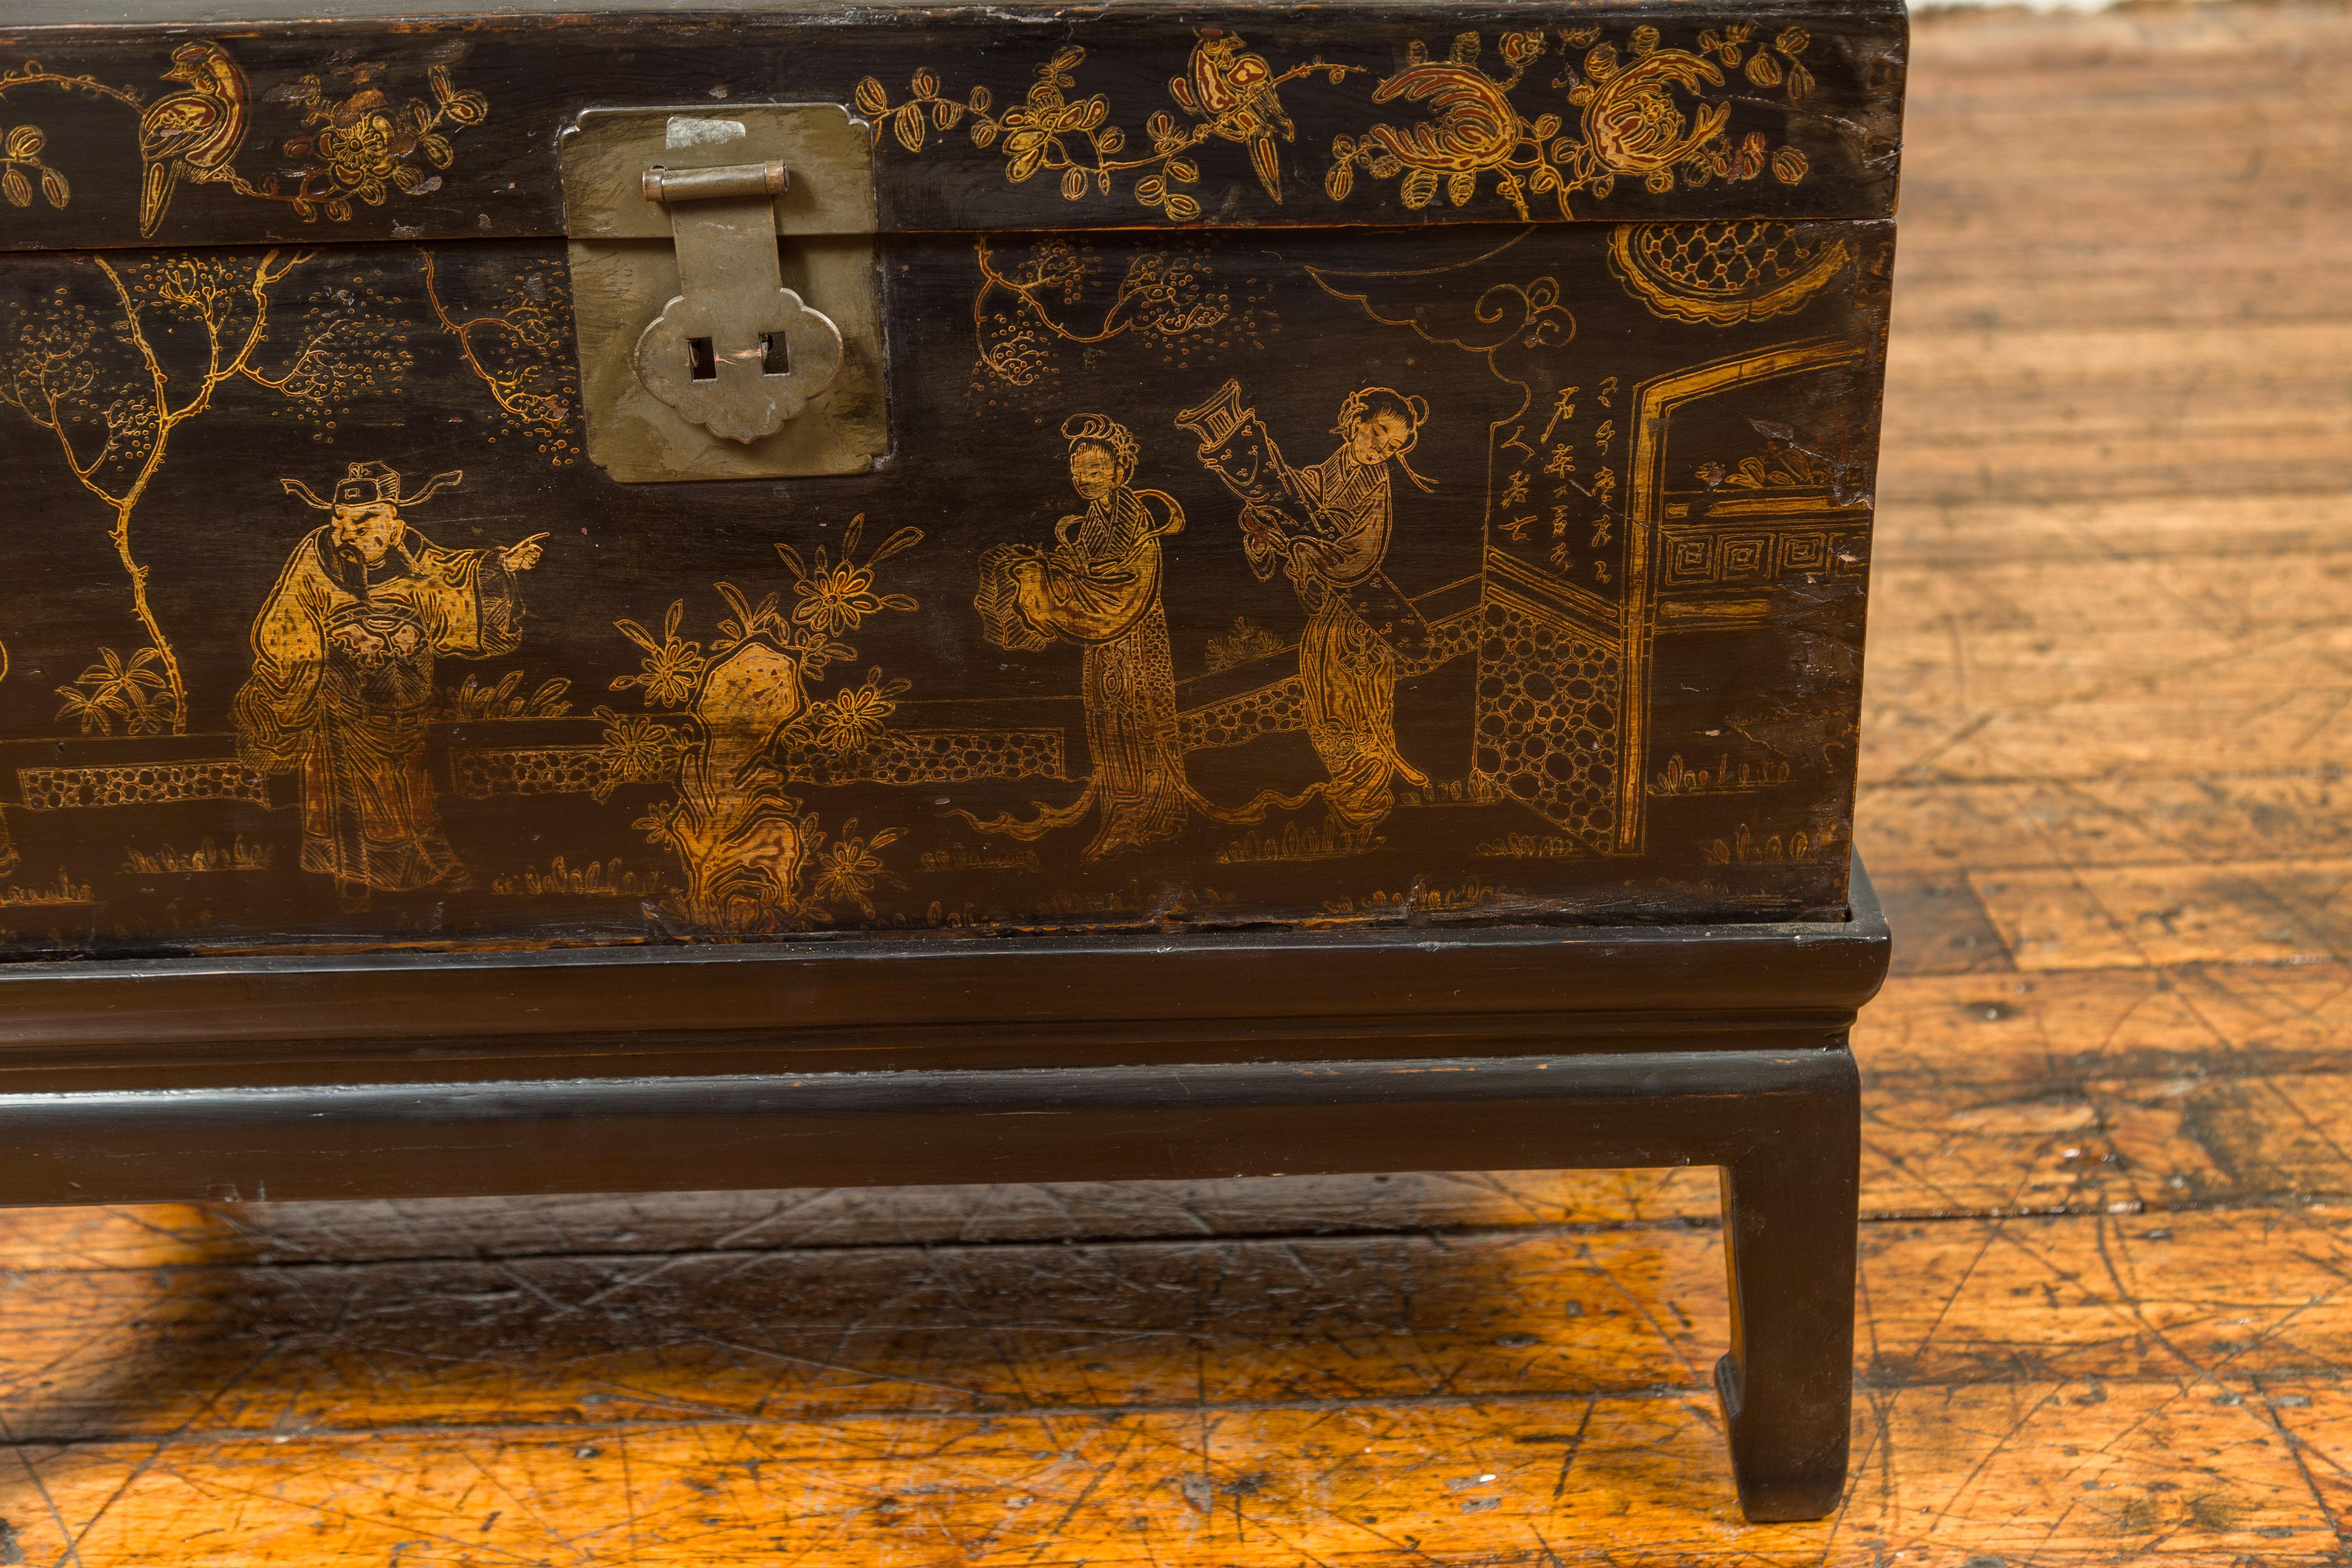 Qing Dynasty 19th Century Black and Gold Blanket Chest with Chinoiserie Painting 1